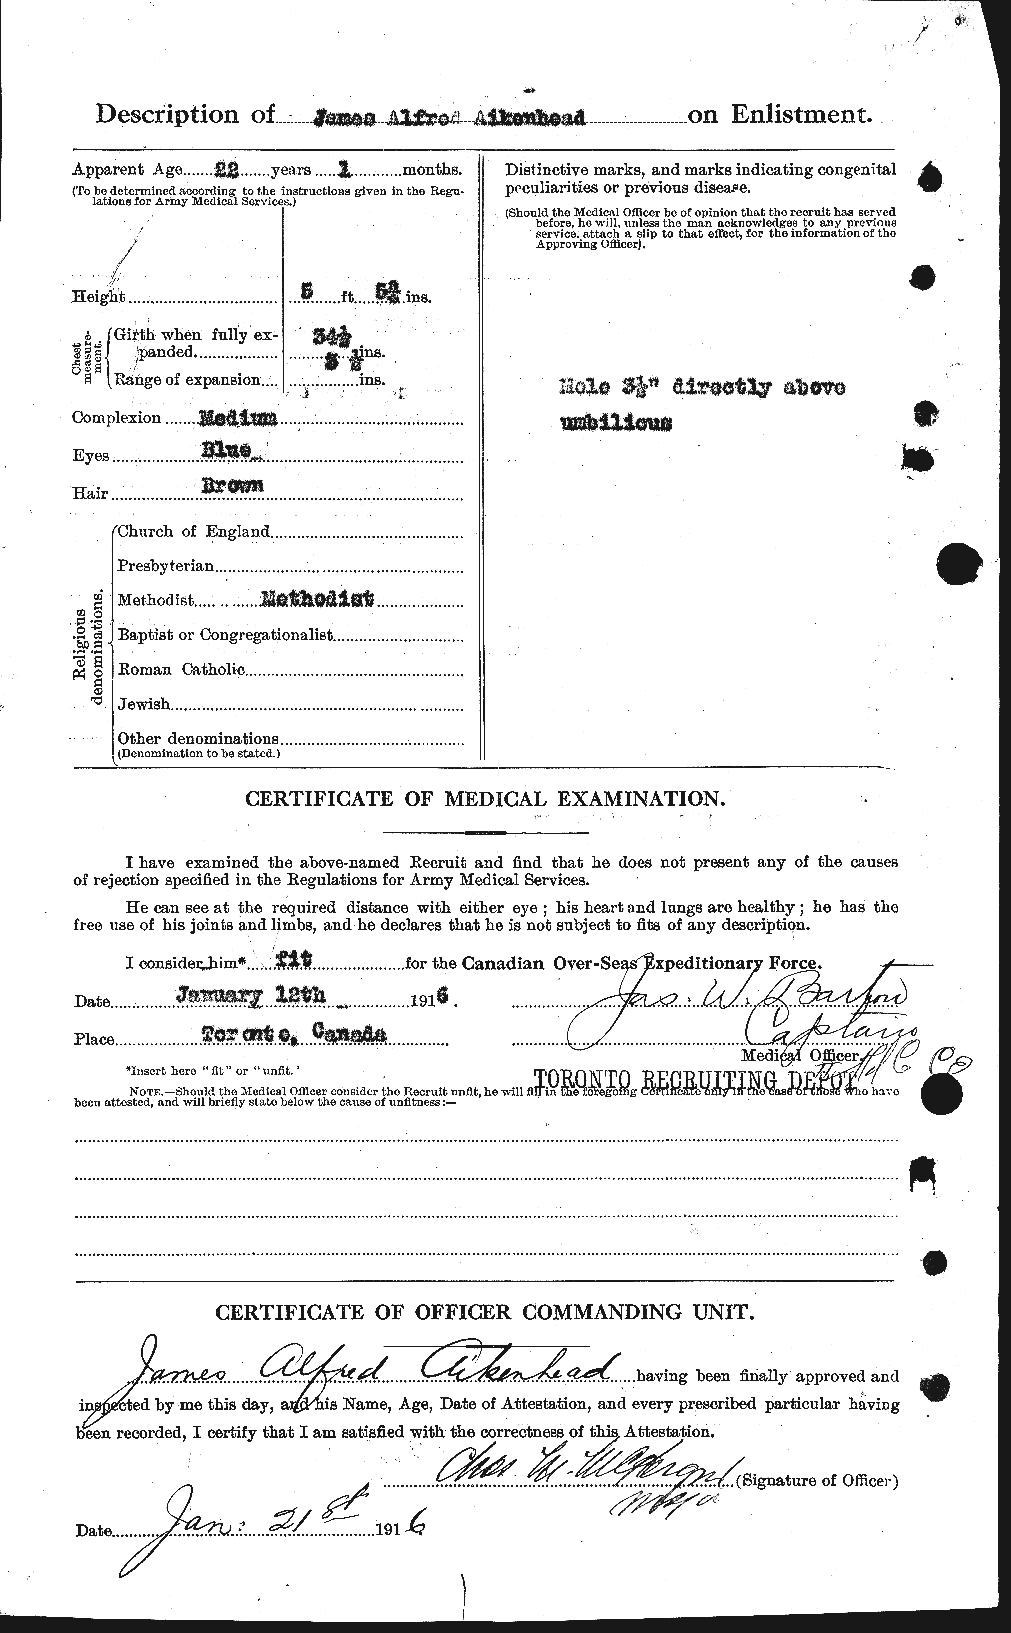 Personnel Records of the First World War - CEF 204131b